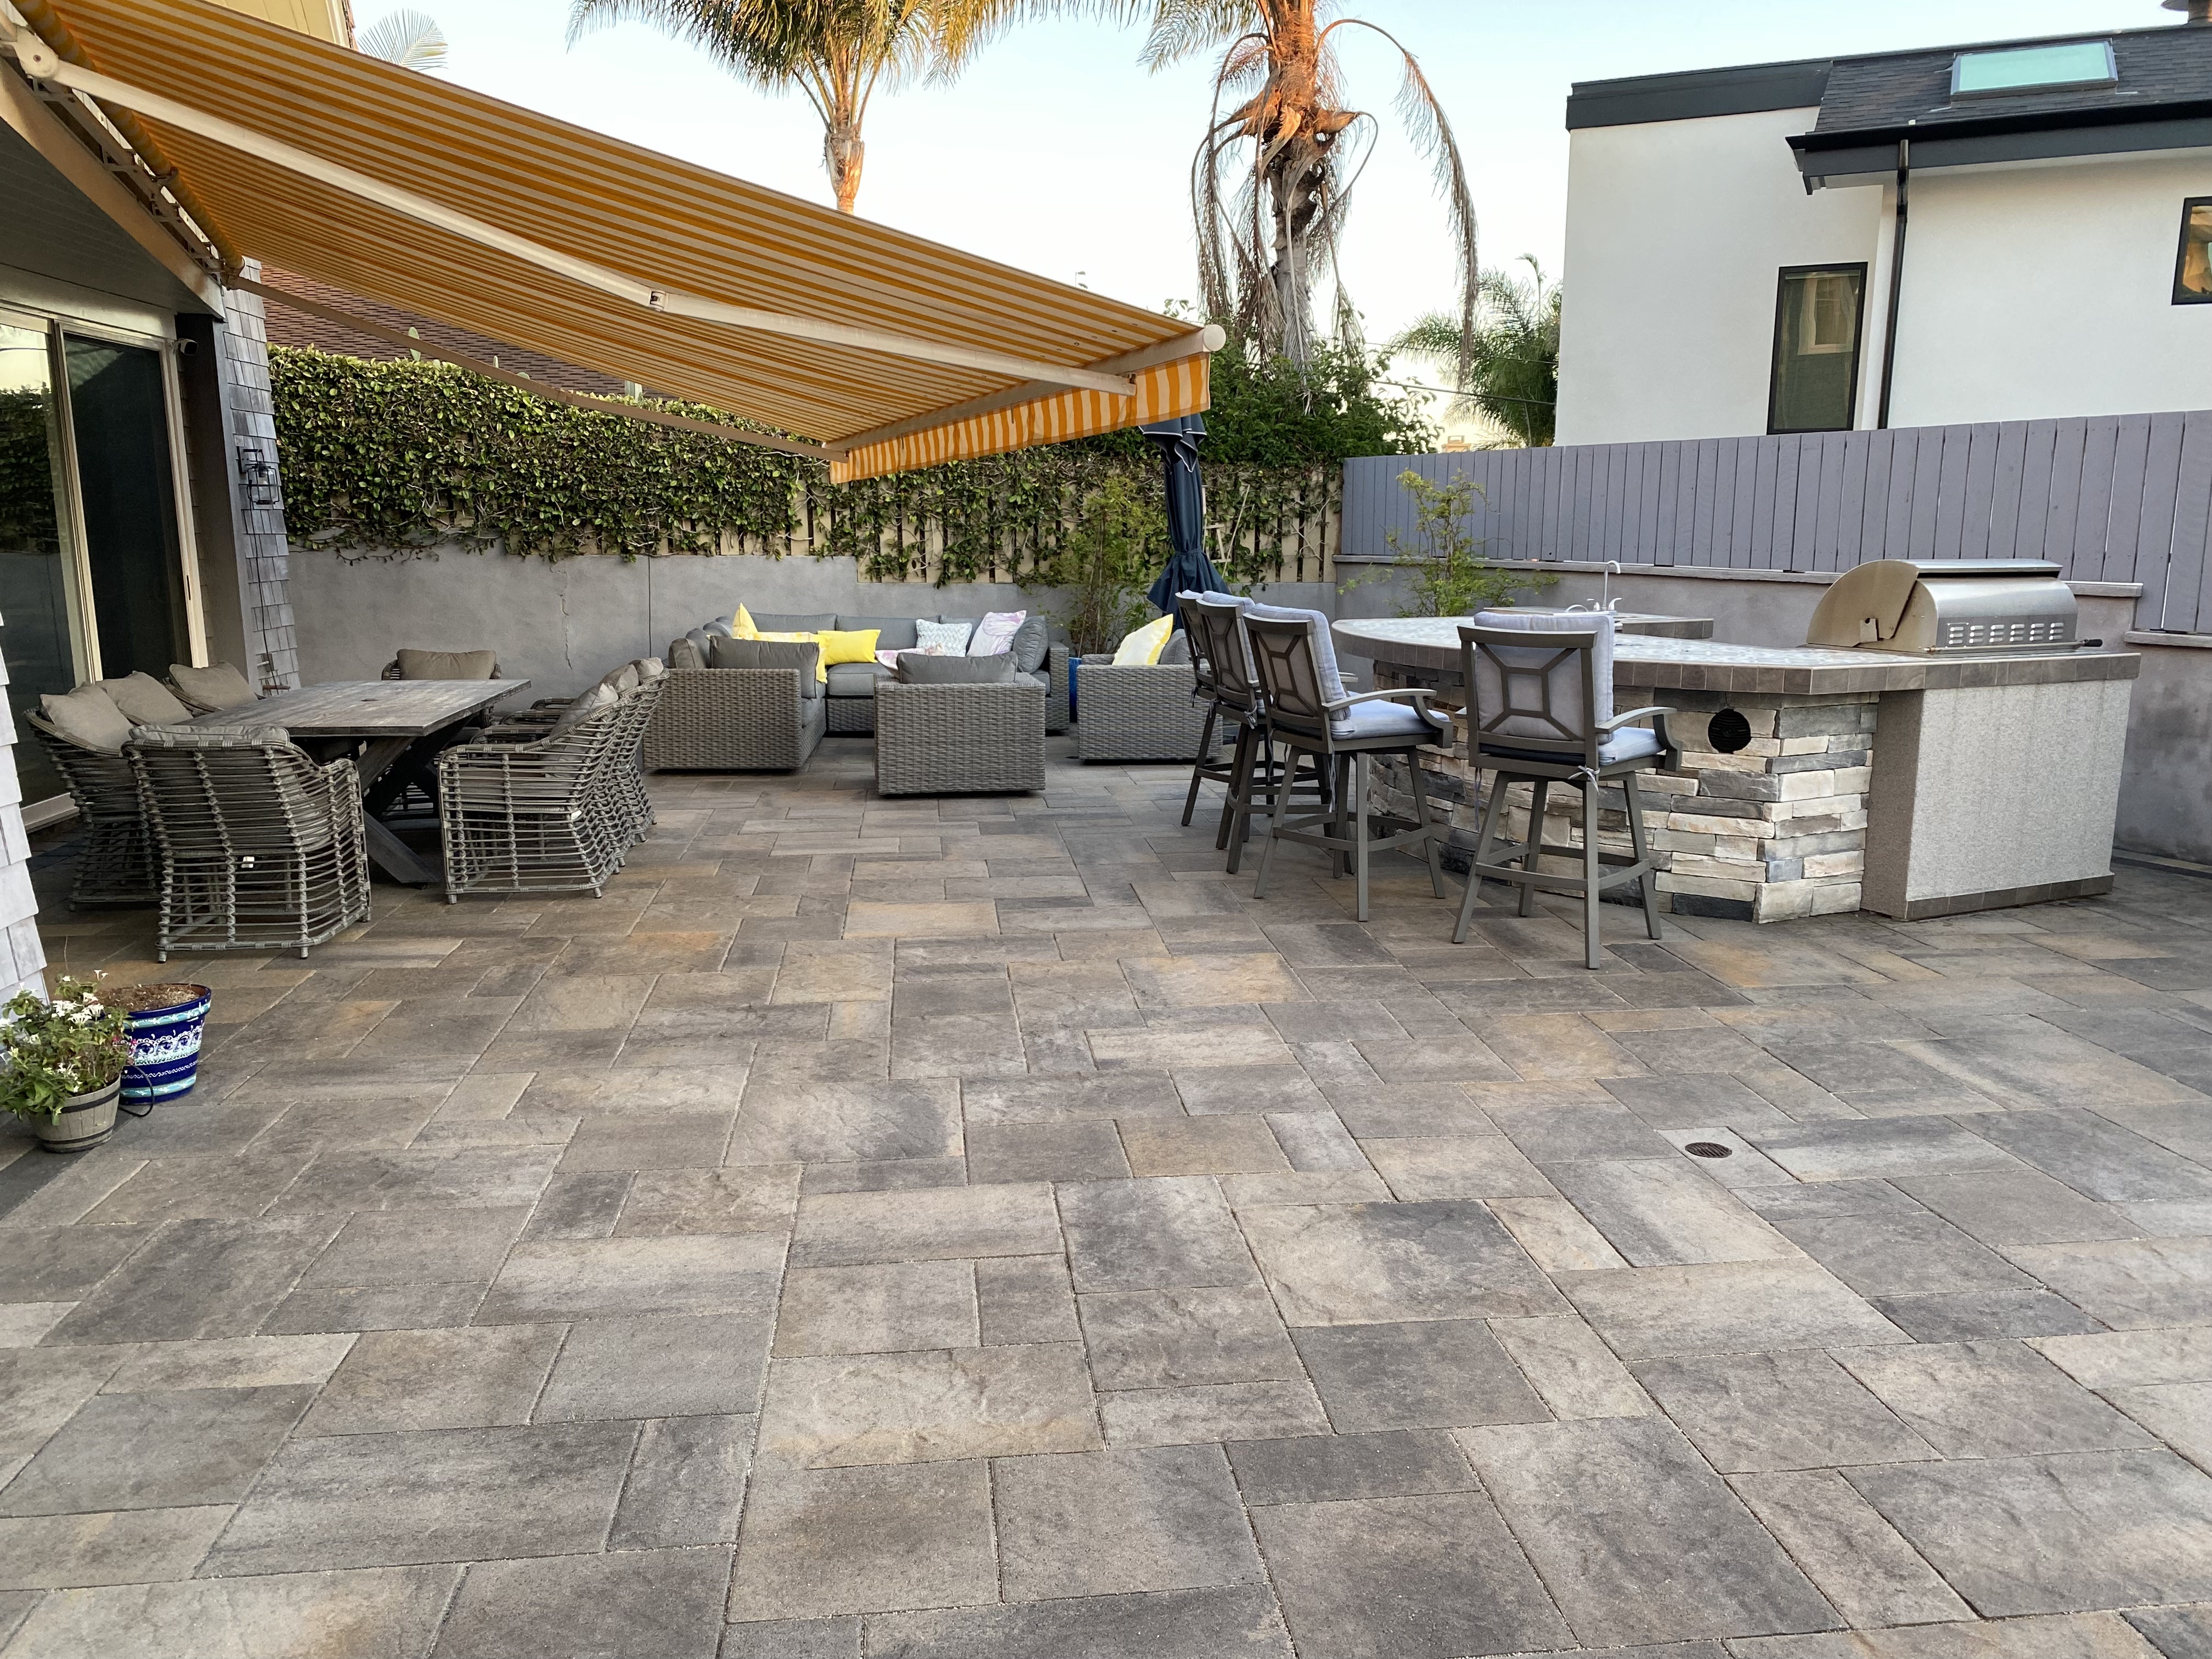 Paving Stone Cleaning And Sealer Application in Dana Point / San Clemente, Ca